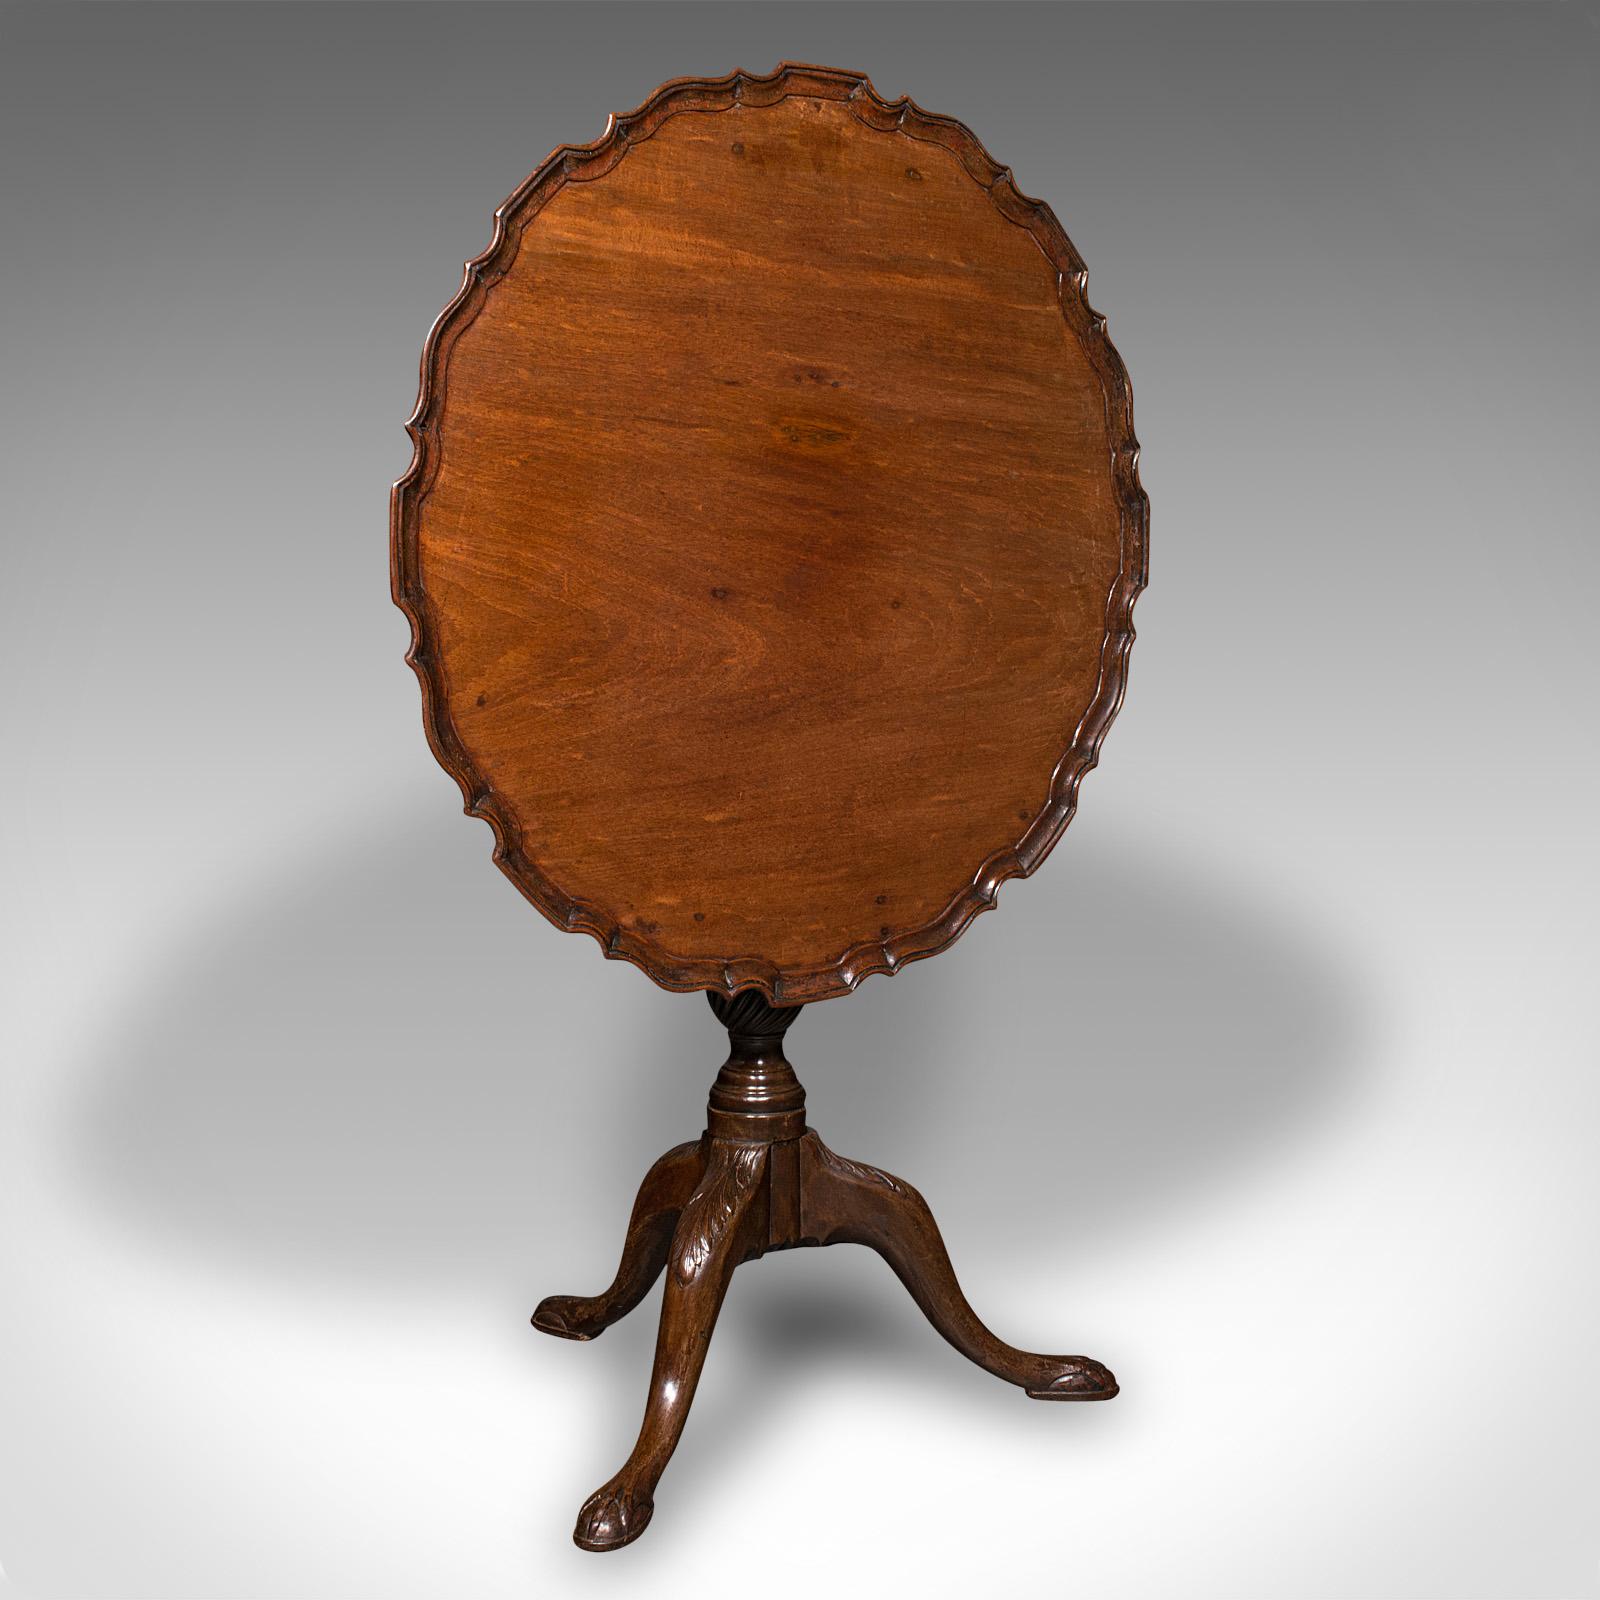 This is an antique pie crust table. An English, mahogany tilt-top occasional table, dating to the Victorian period, circa 1870.

Charmingly decorative top, of generous size and appealing craftsmanship
Displays a desirable aged patina and in good